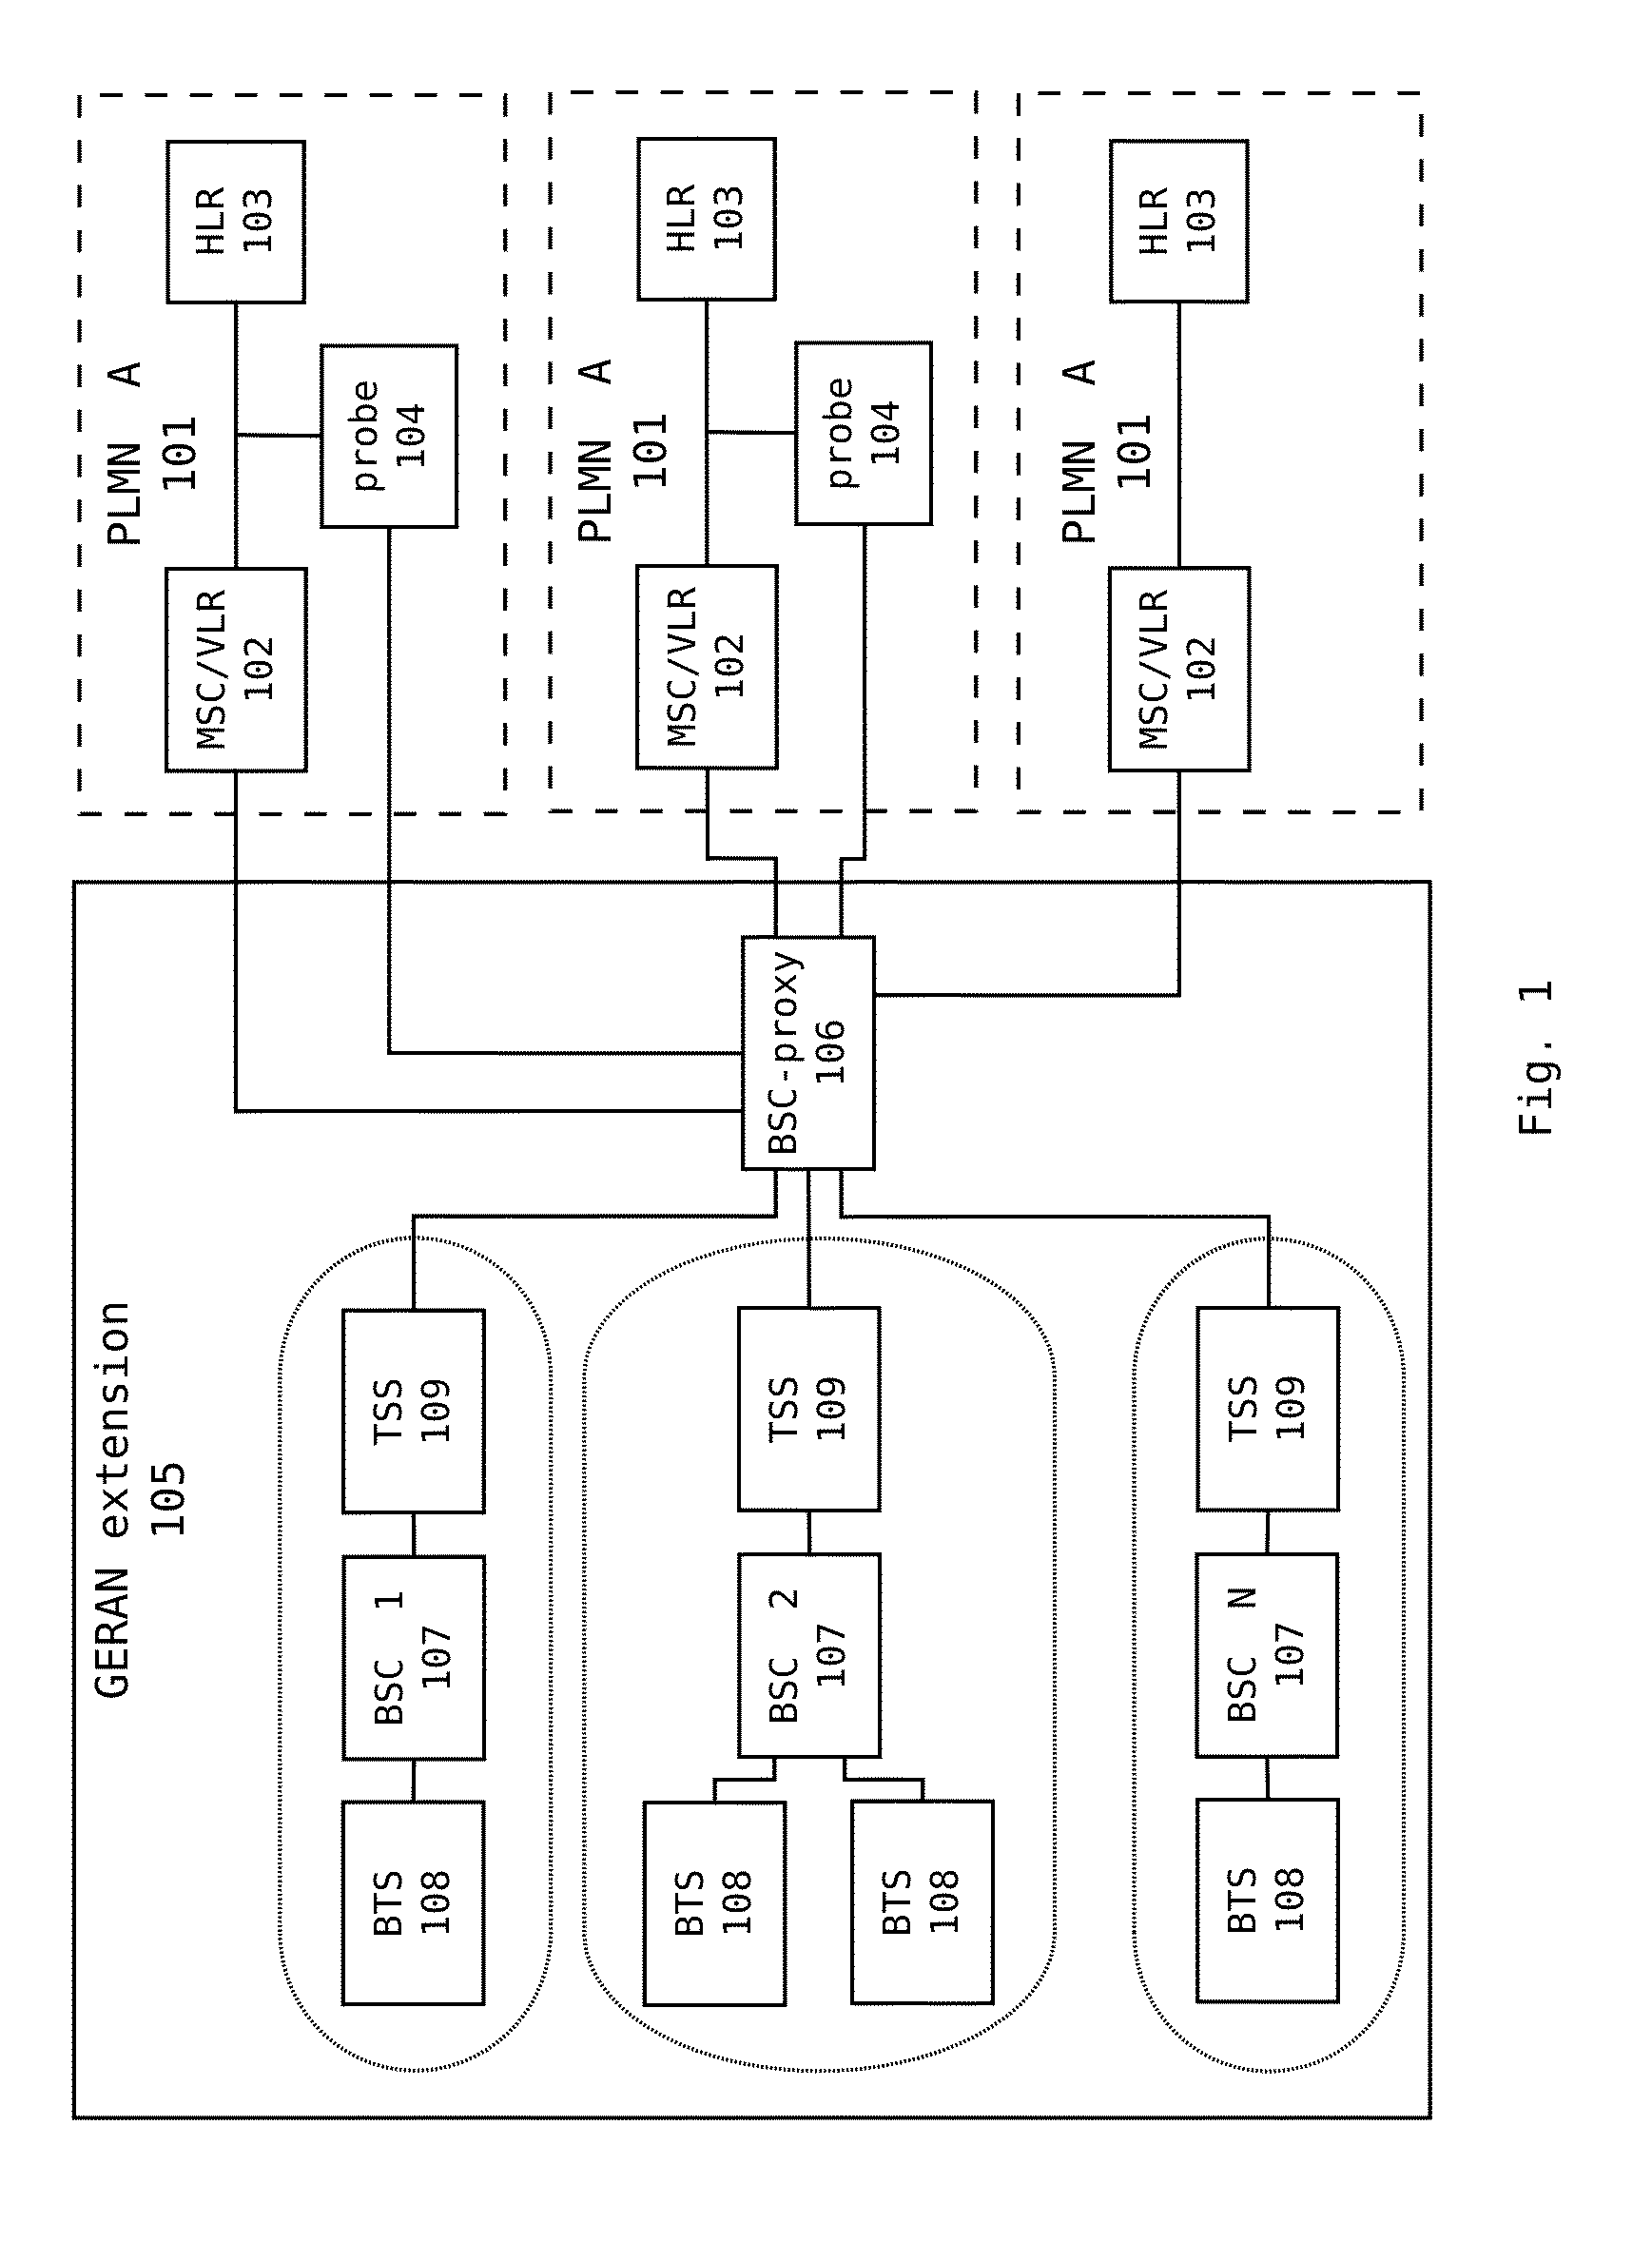 System and method for concurrently sharing GSM coverage  by  mobile operators and for implementing local switching without impact on core networks